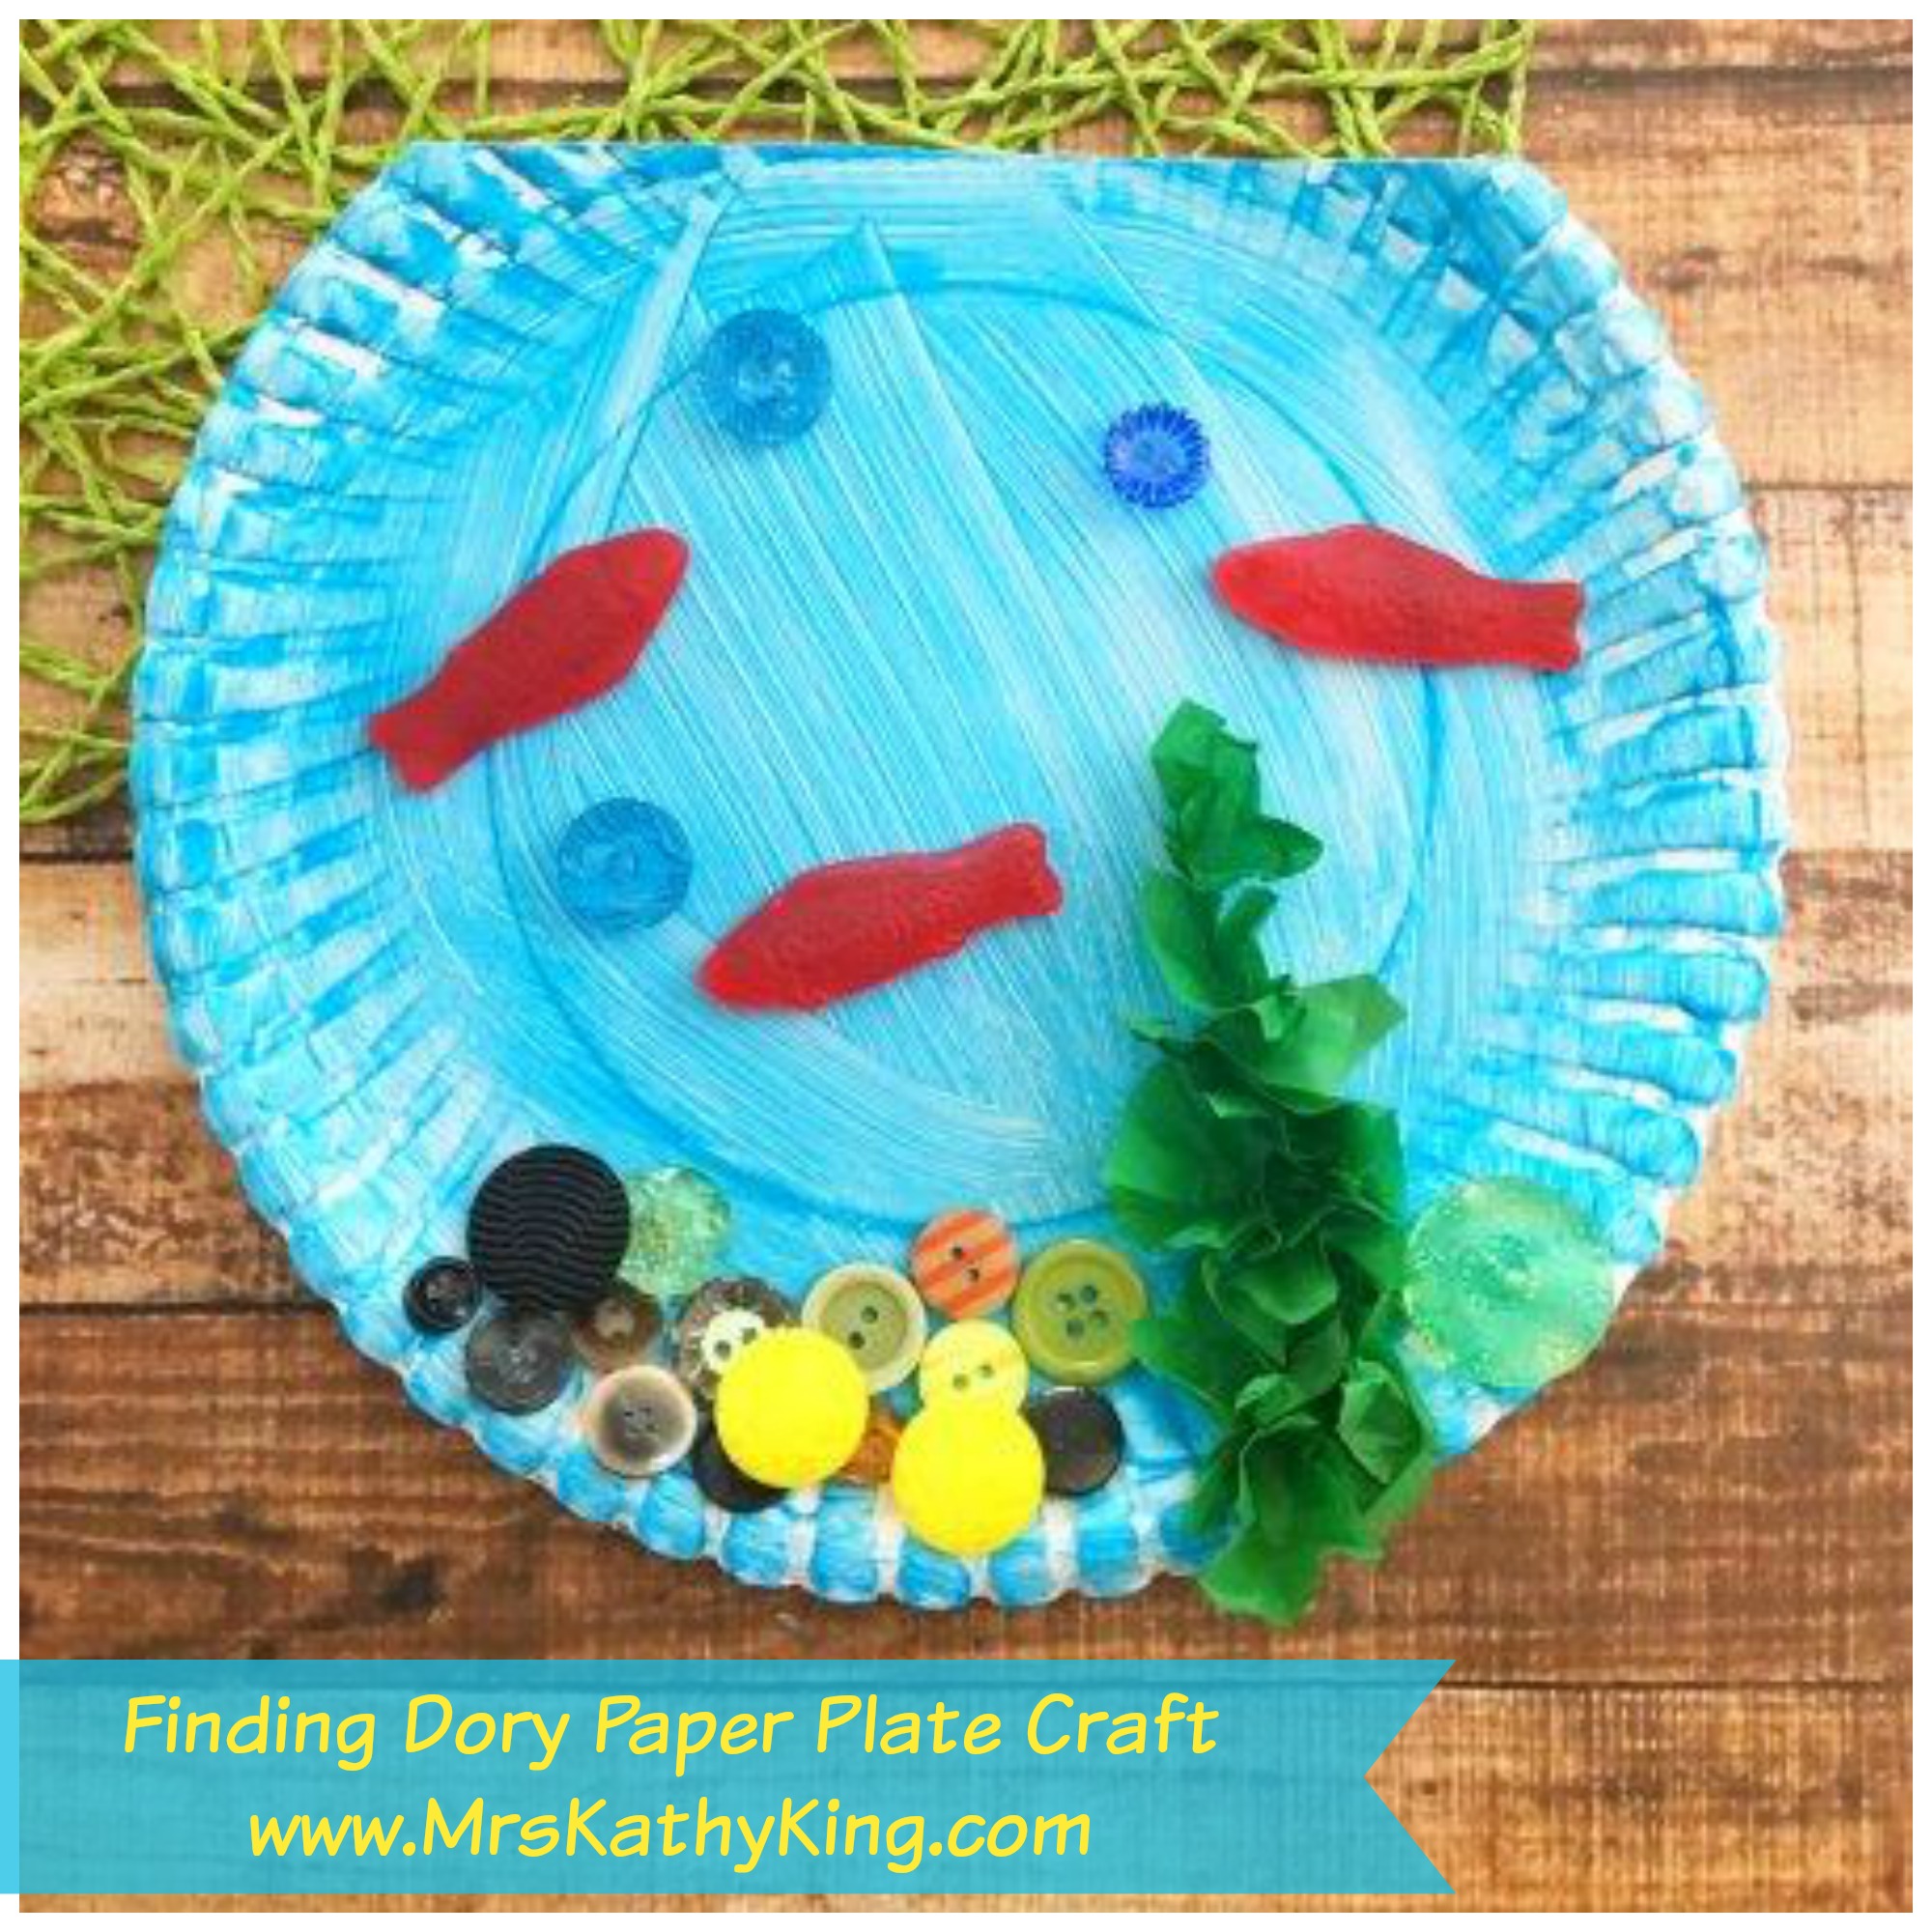 Finding Dory Paper Plate Craft